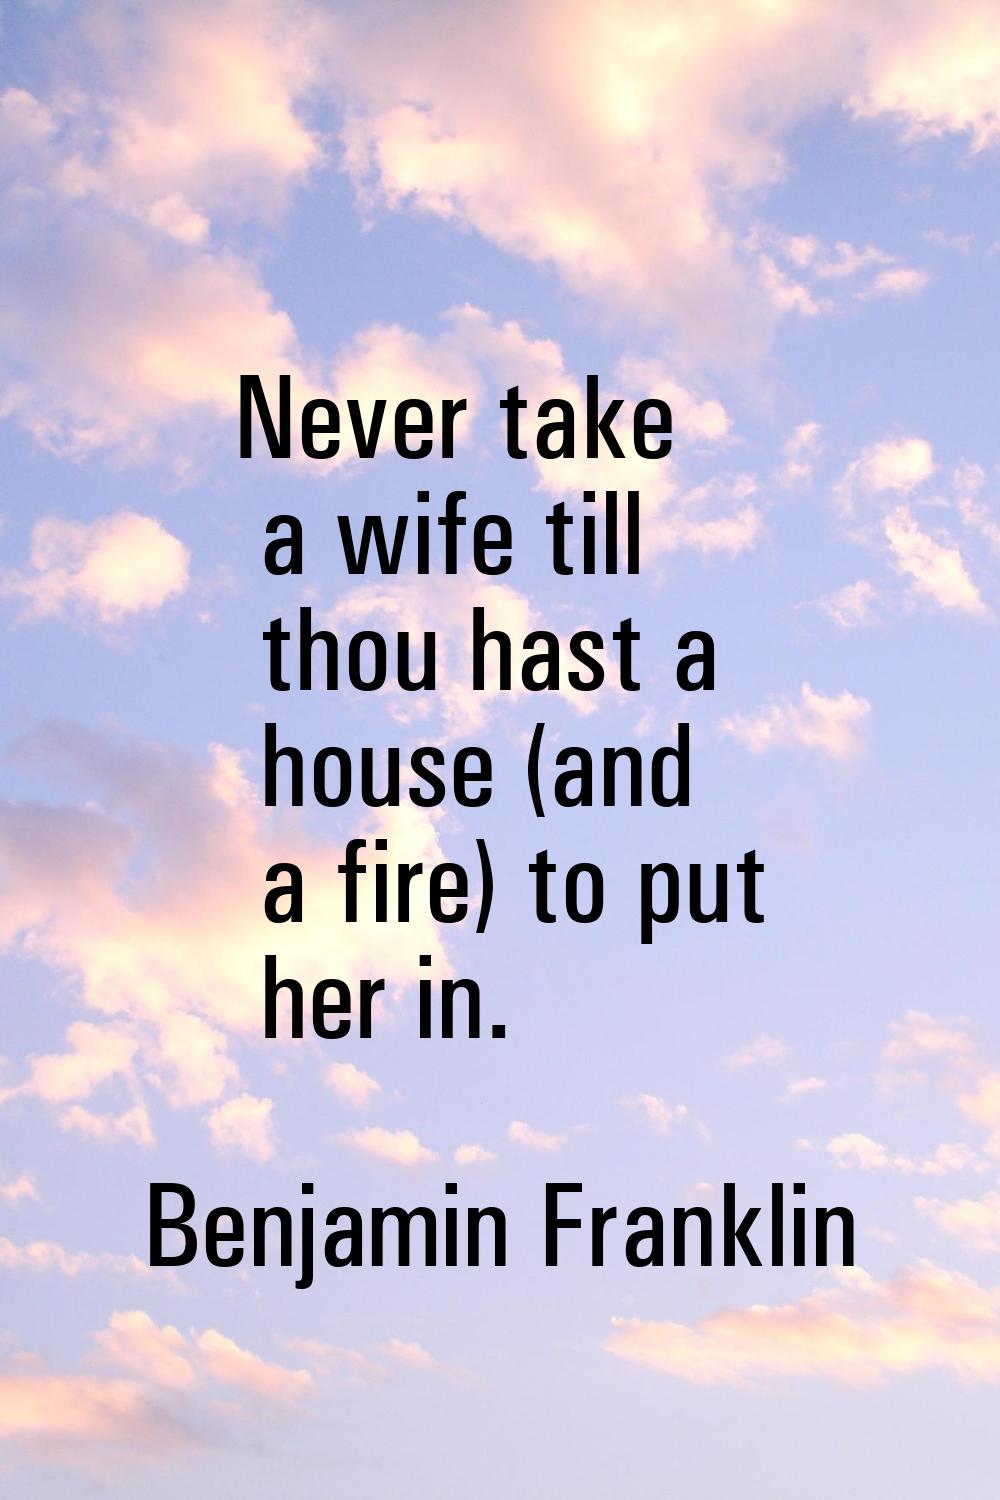 Never take a wife till thou hast a house (and a fire) to put her in.